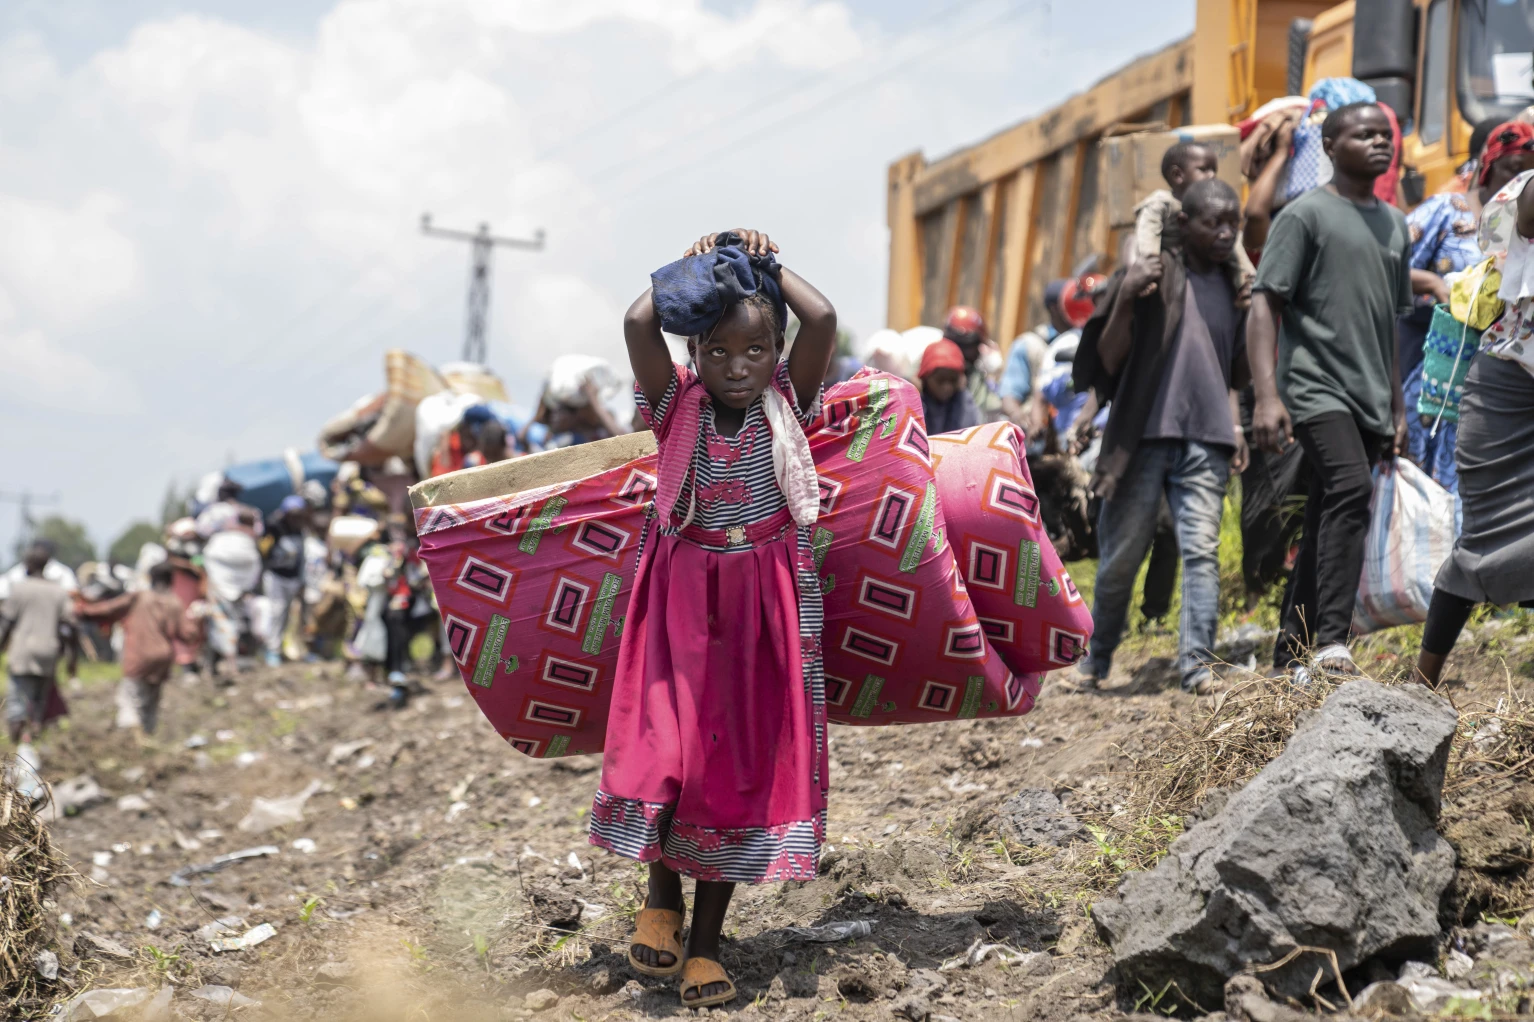 Residents of eastern DR Congo flee fearing M23 rebels are on verge of taking control of Goma